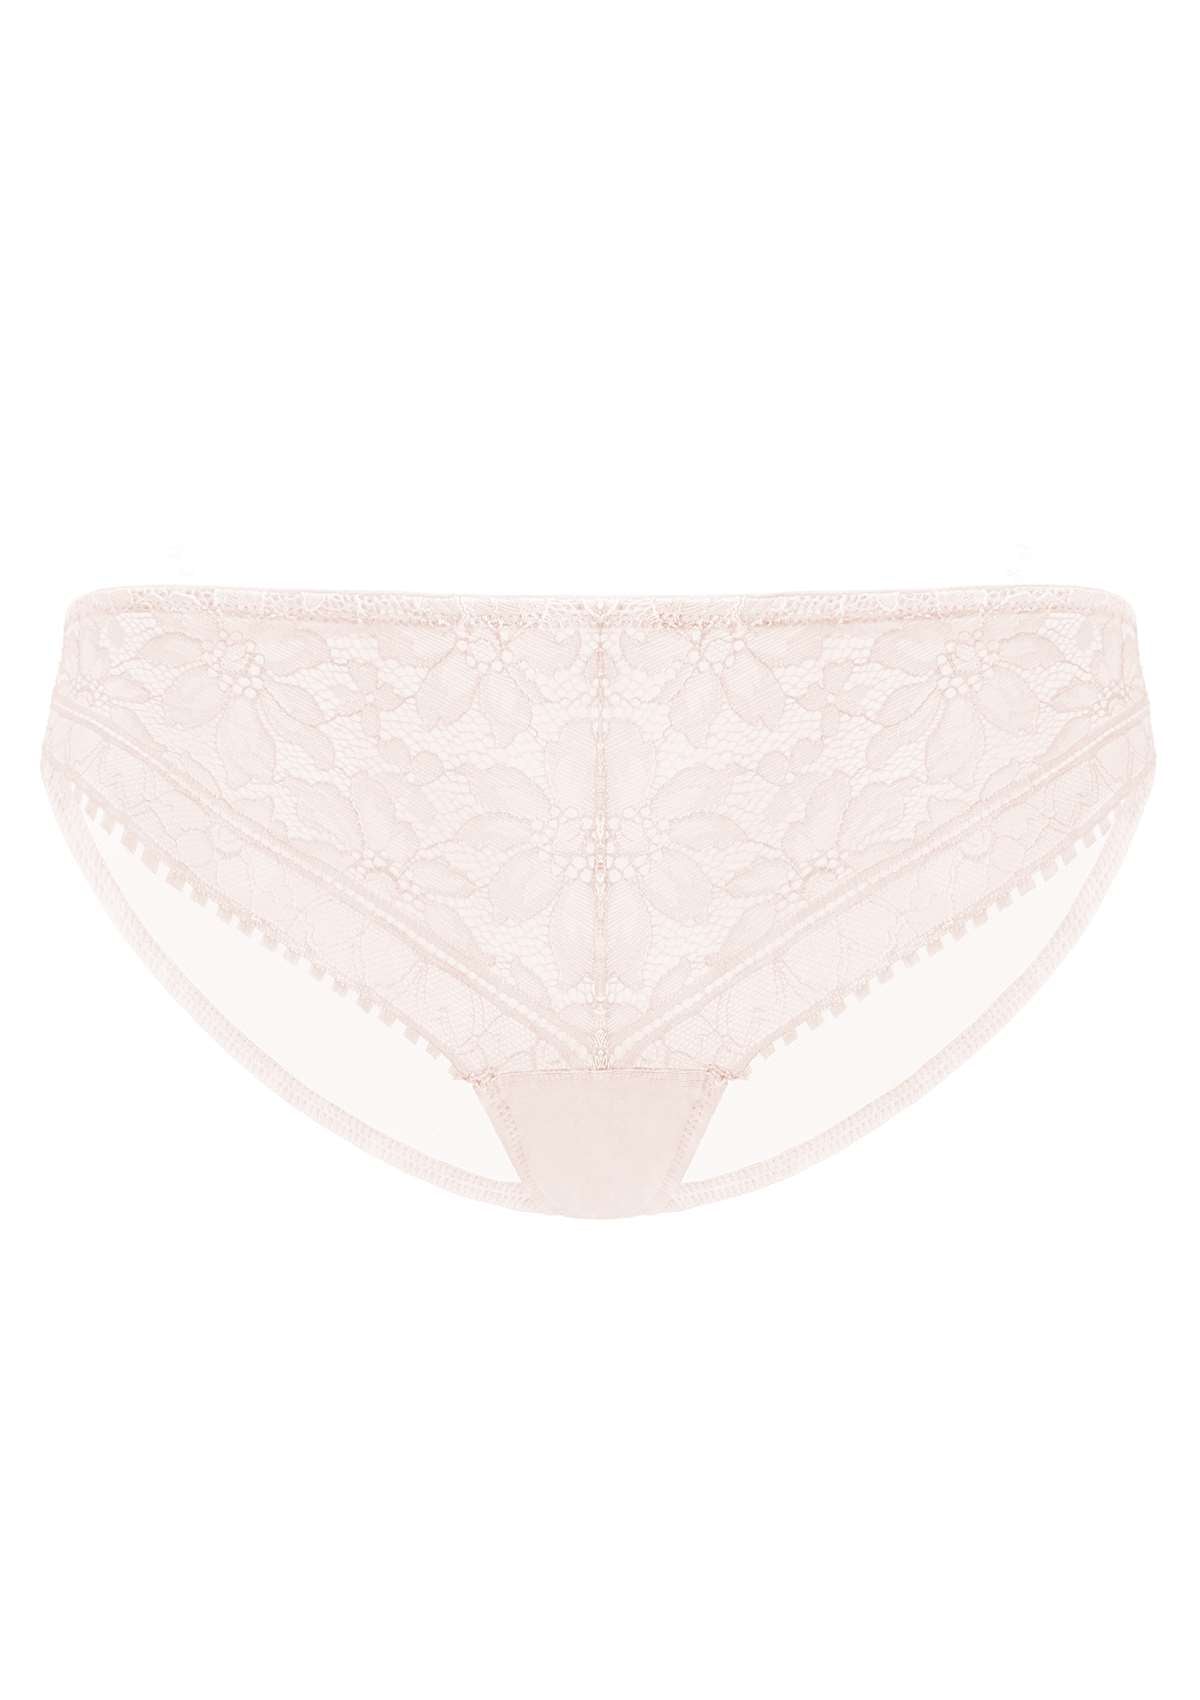 HSIA Silene Sheer Lace Mesh Hipster Underwear 3 Pack - M / Light Blue+Champagne+Light Pink